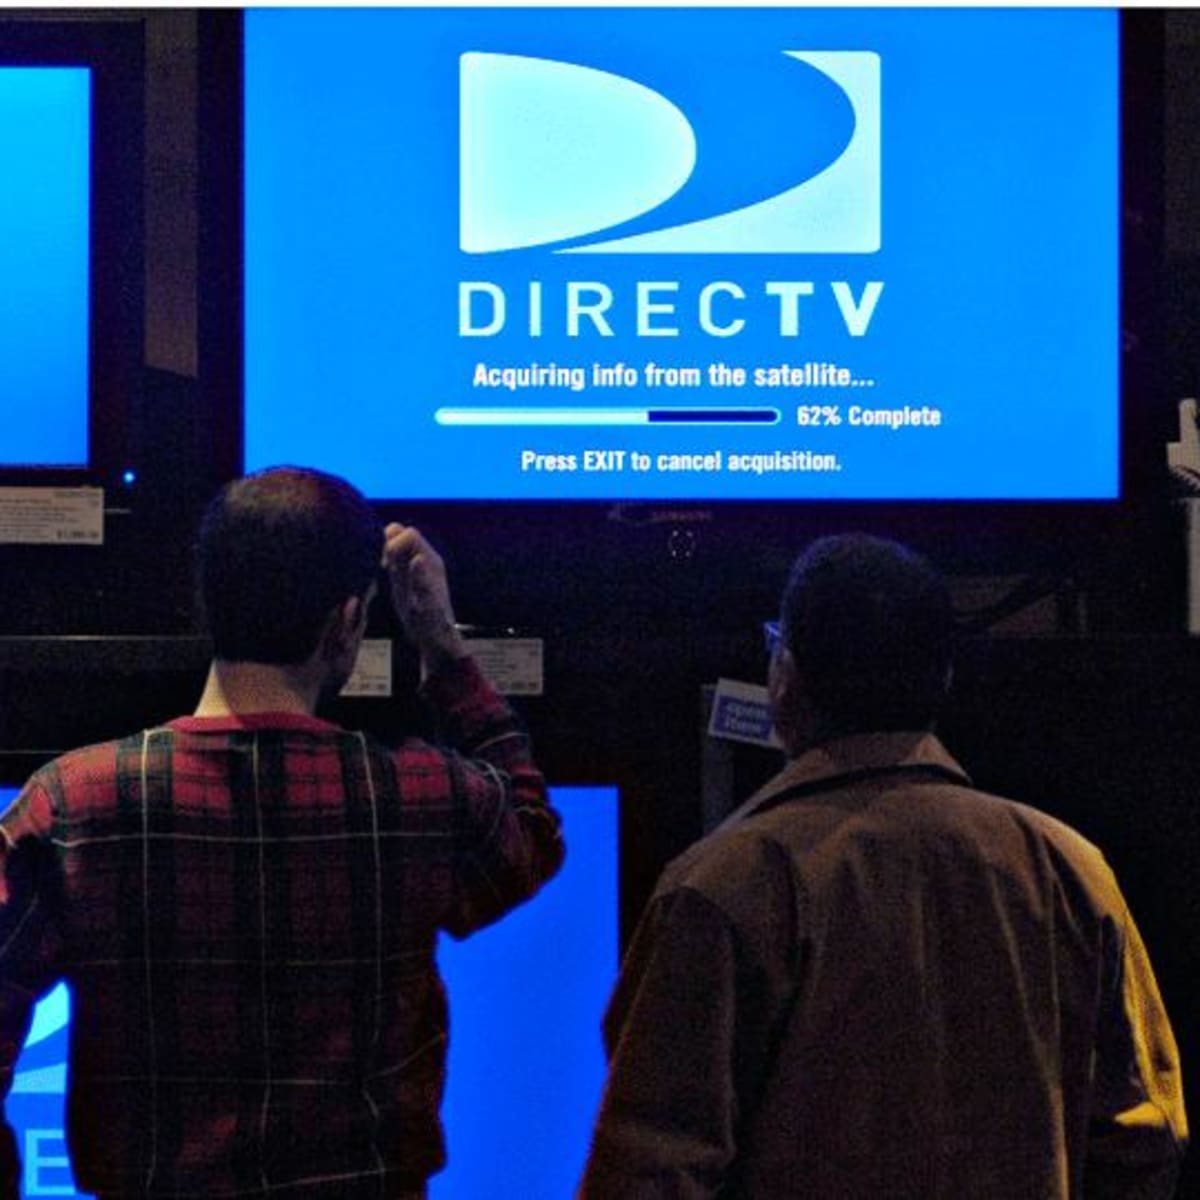 DirecTV customers now have WatchESPN access